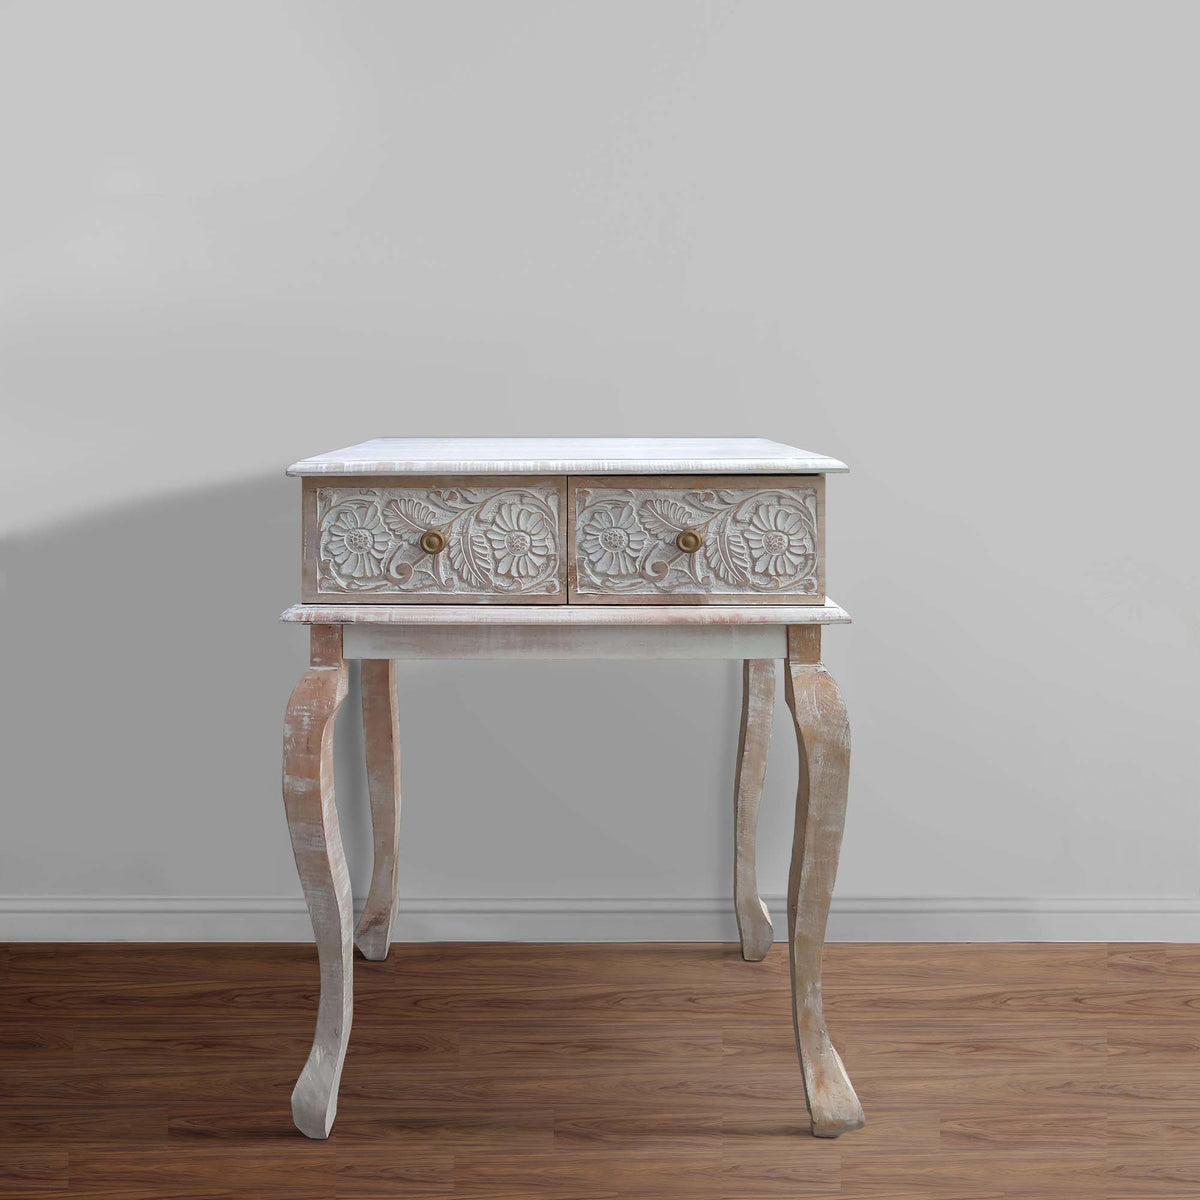 2 Drawer Mango Wood Console Table with Floral Carved Front, Brown and White - UPT-226283